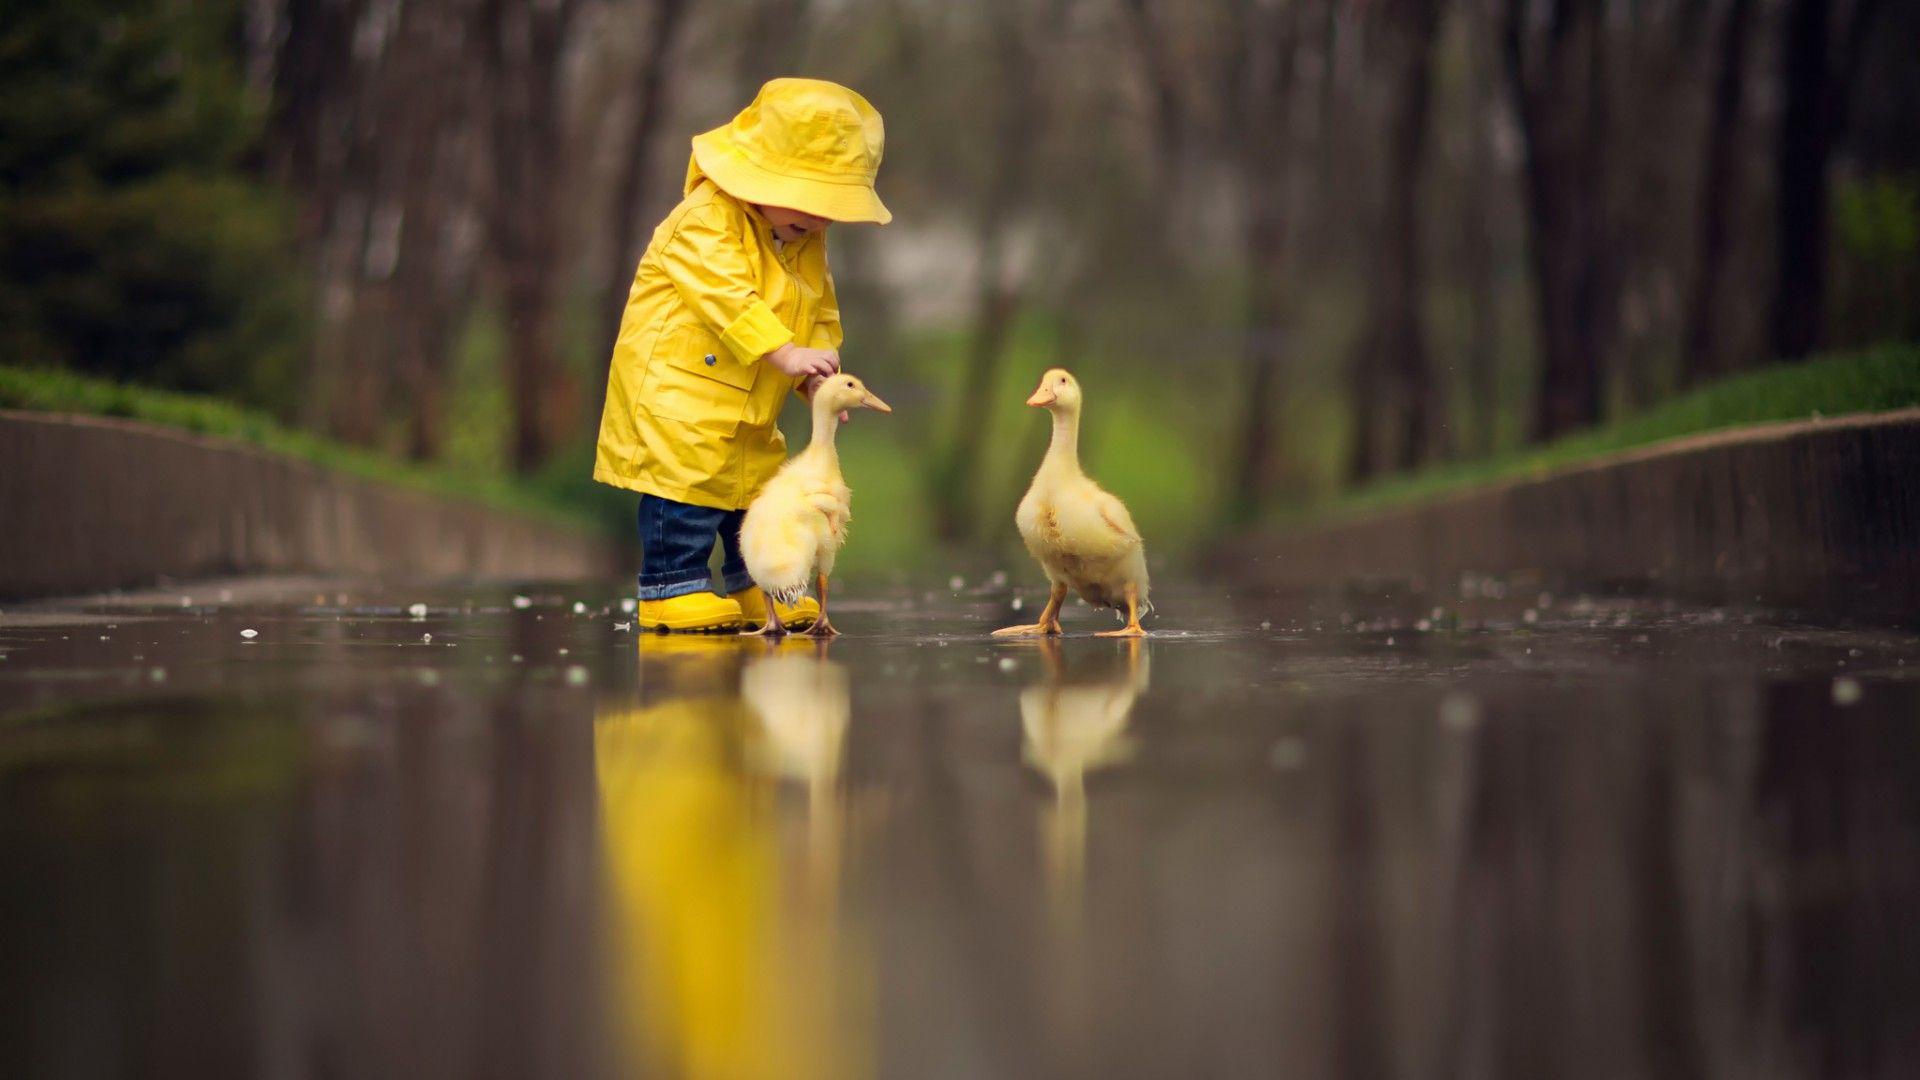 Small child with ducks [1920x1080]